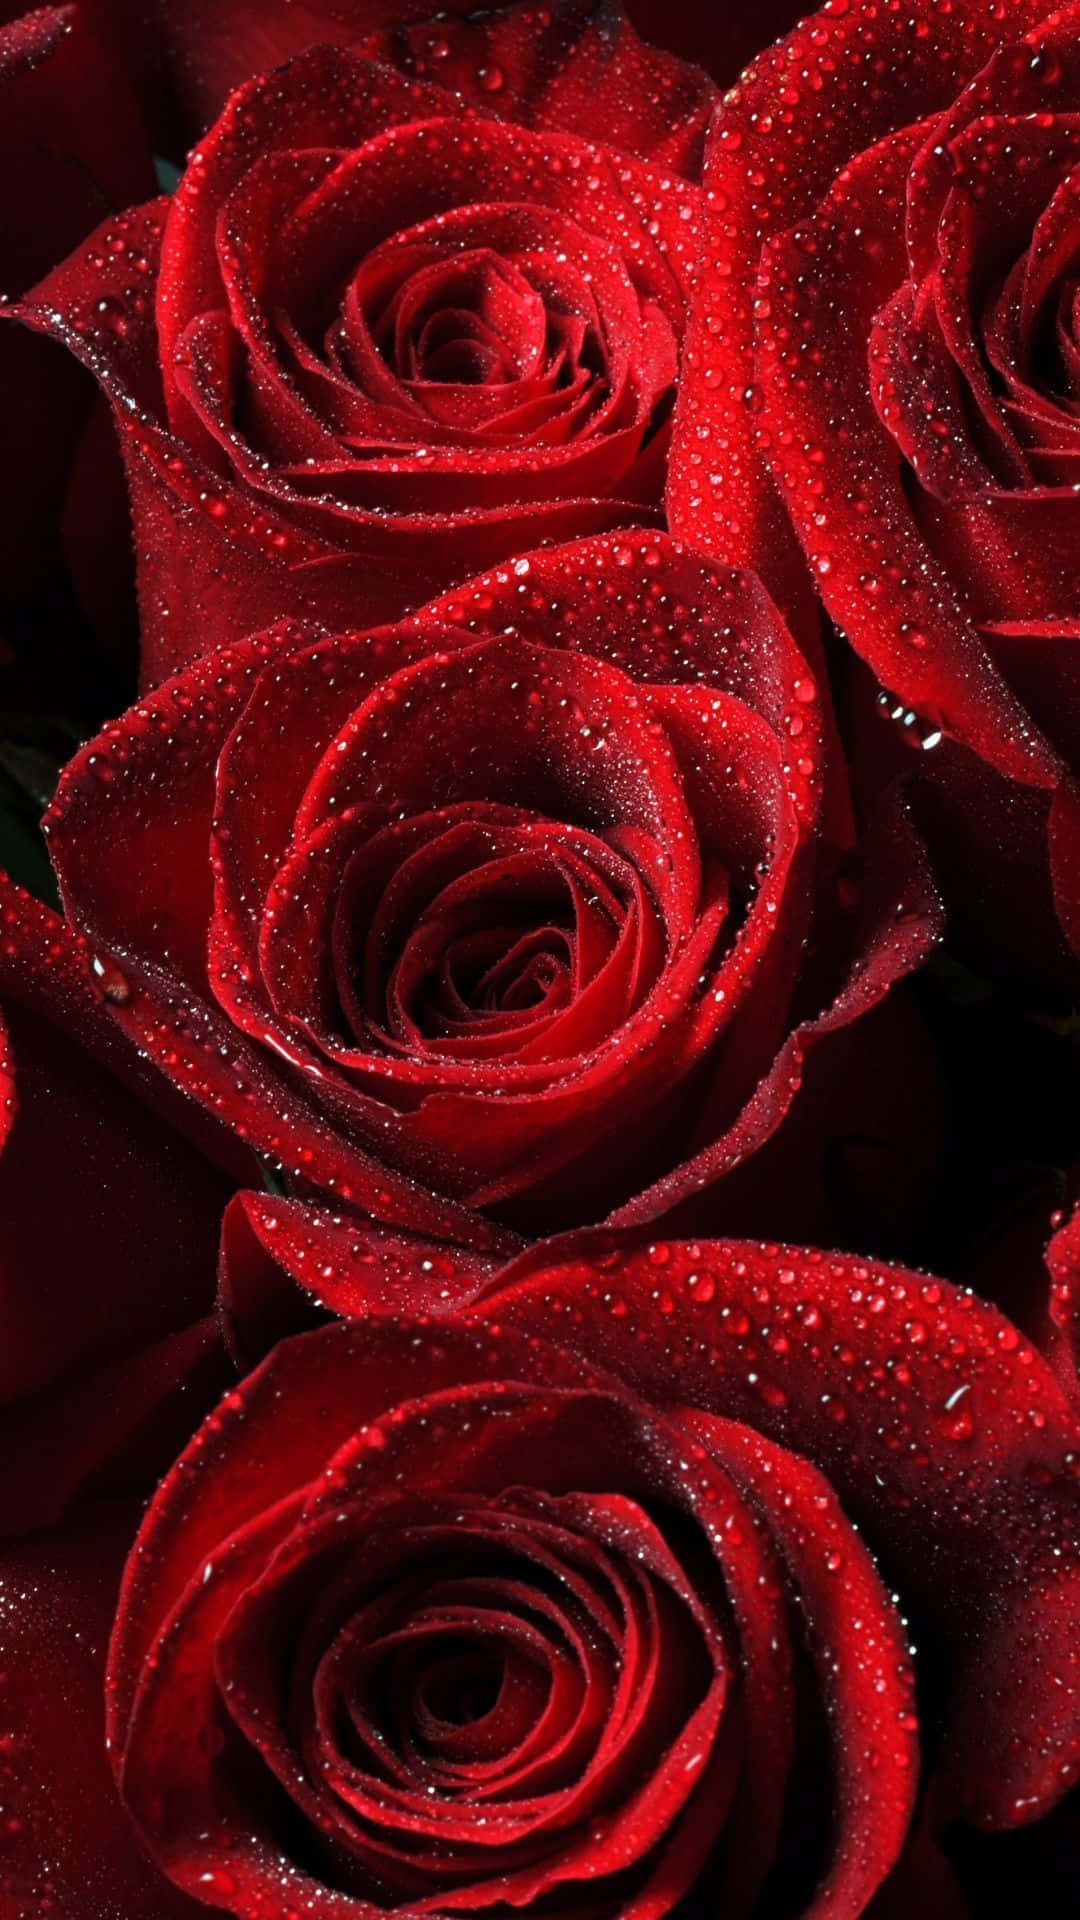 "A Symbol of Love and Beauty - A Cute Rose" Wallpaper